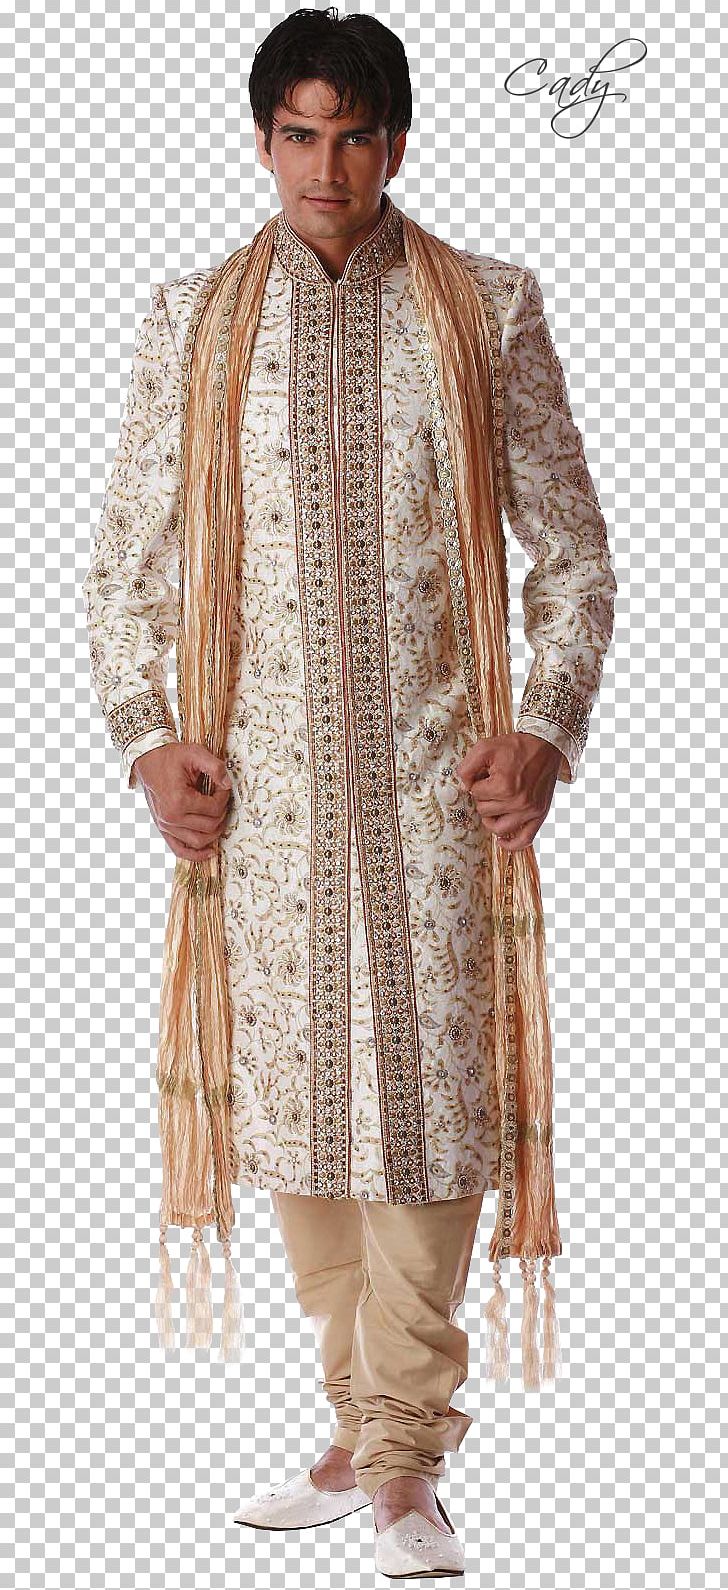 Robe PNG, Clipart, Costume, Formal Wear, For Men, Indian, Indian Man Free PNG Download